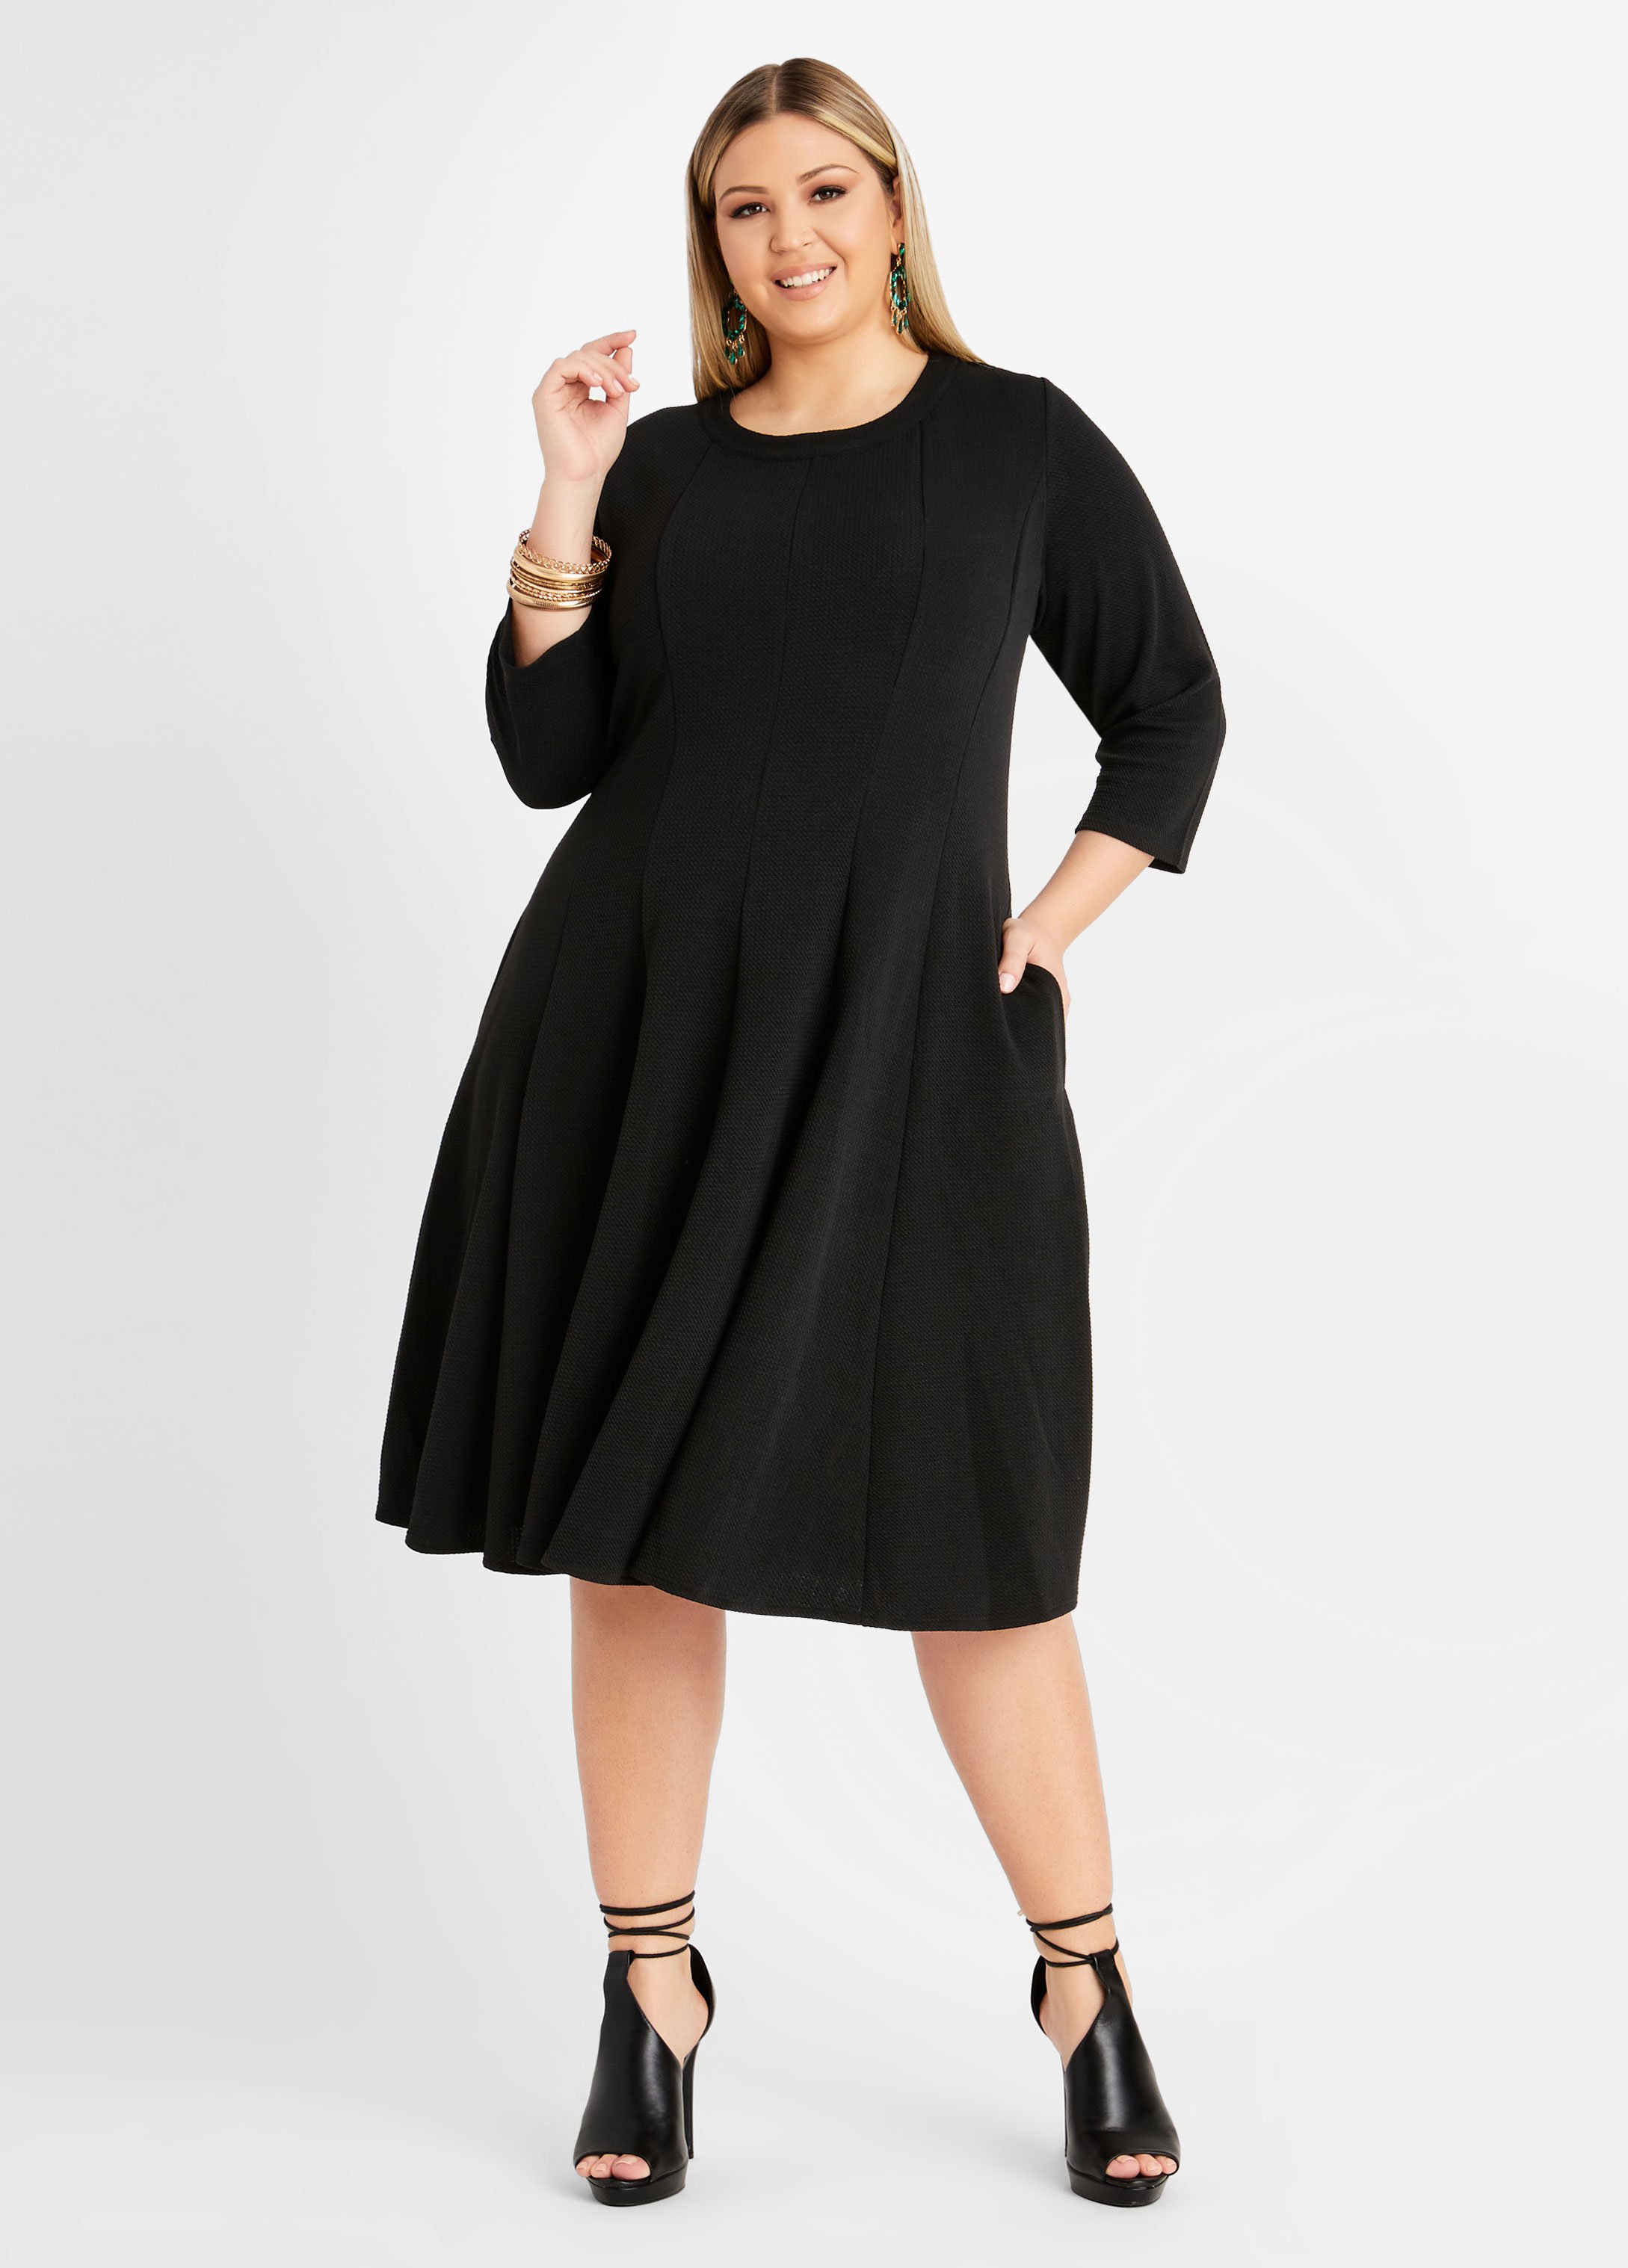 Plus Size A Line Dresses Plus Size Dresses For All Occasions